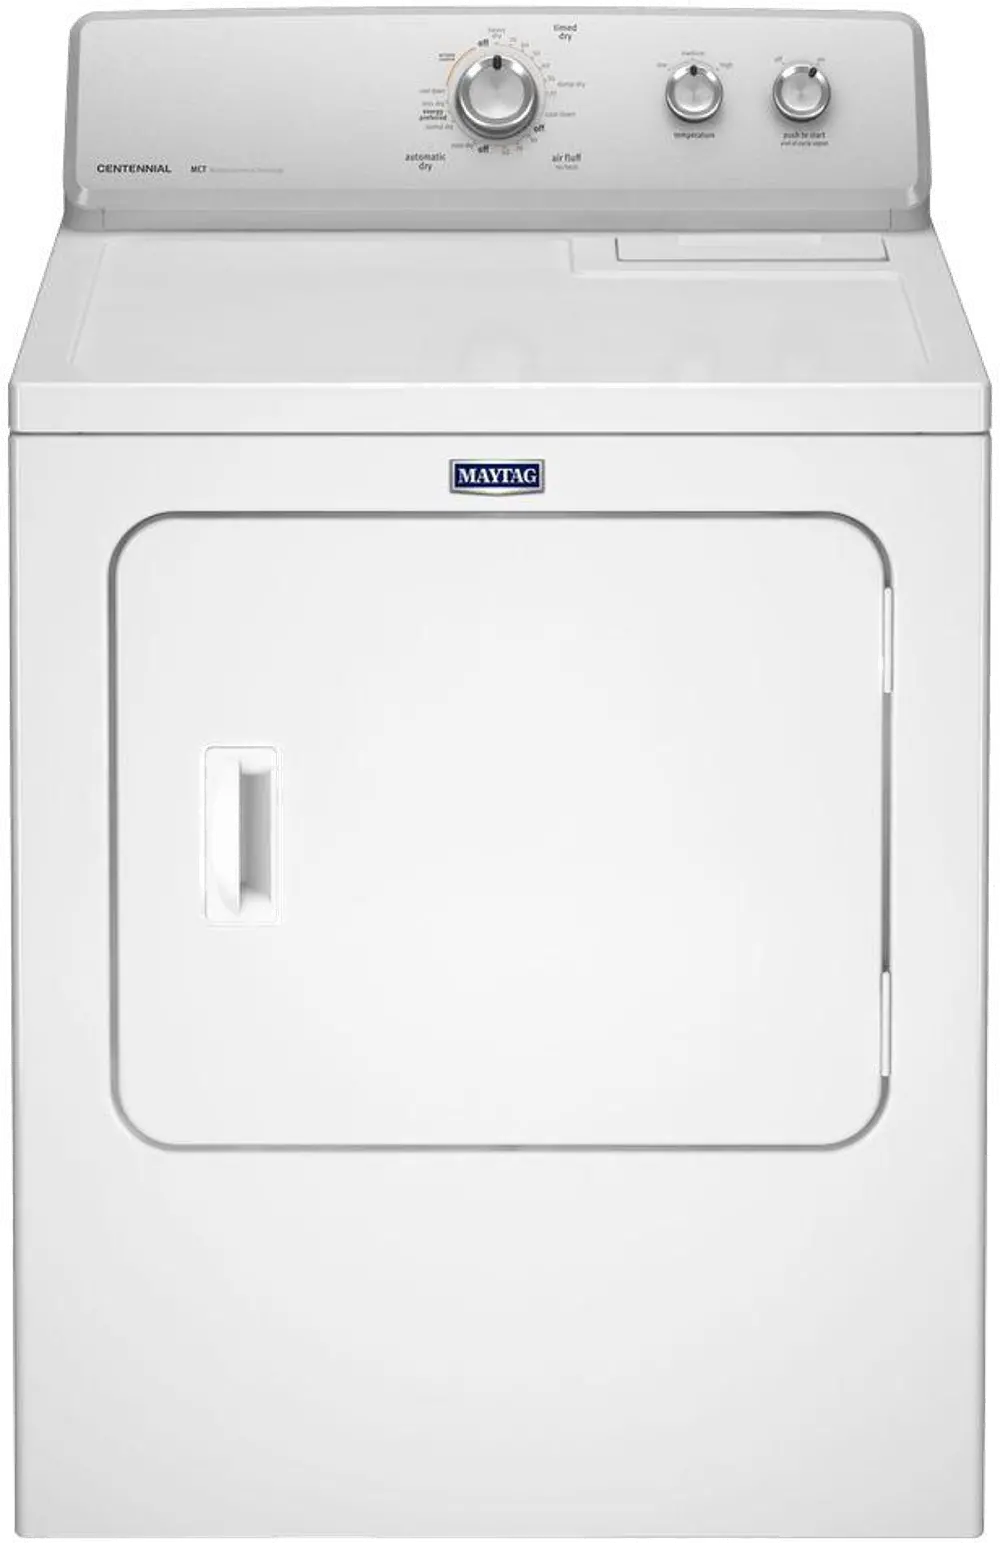 MGDC215EW Maytag 7 cu. ft. Front Load Gas Dryer - White-1